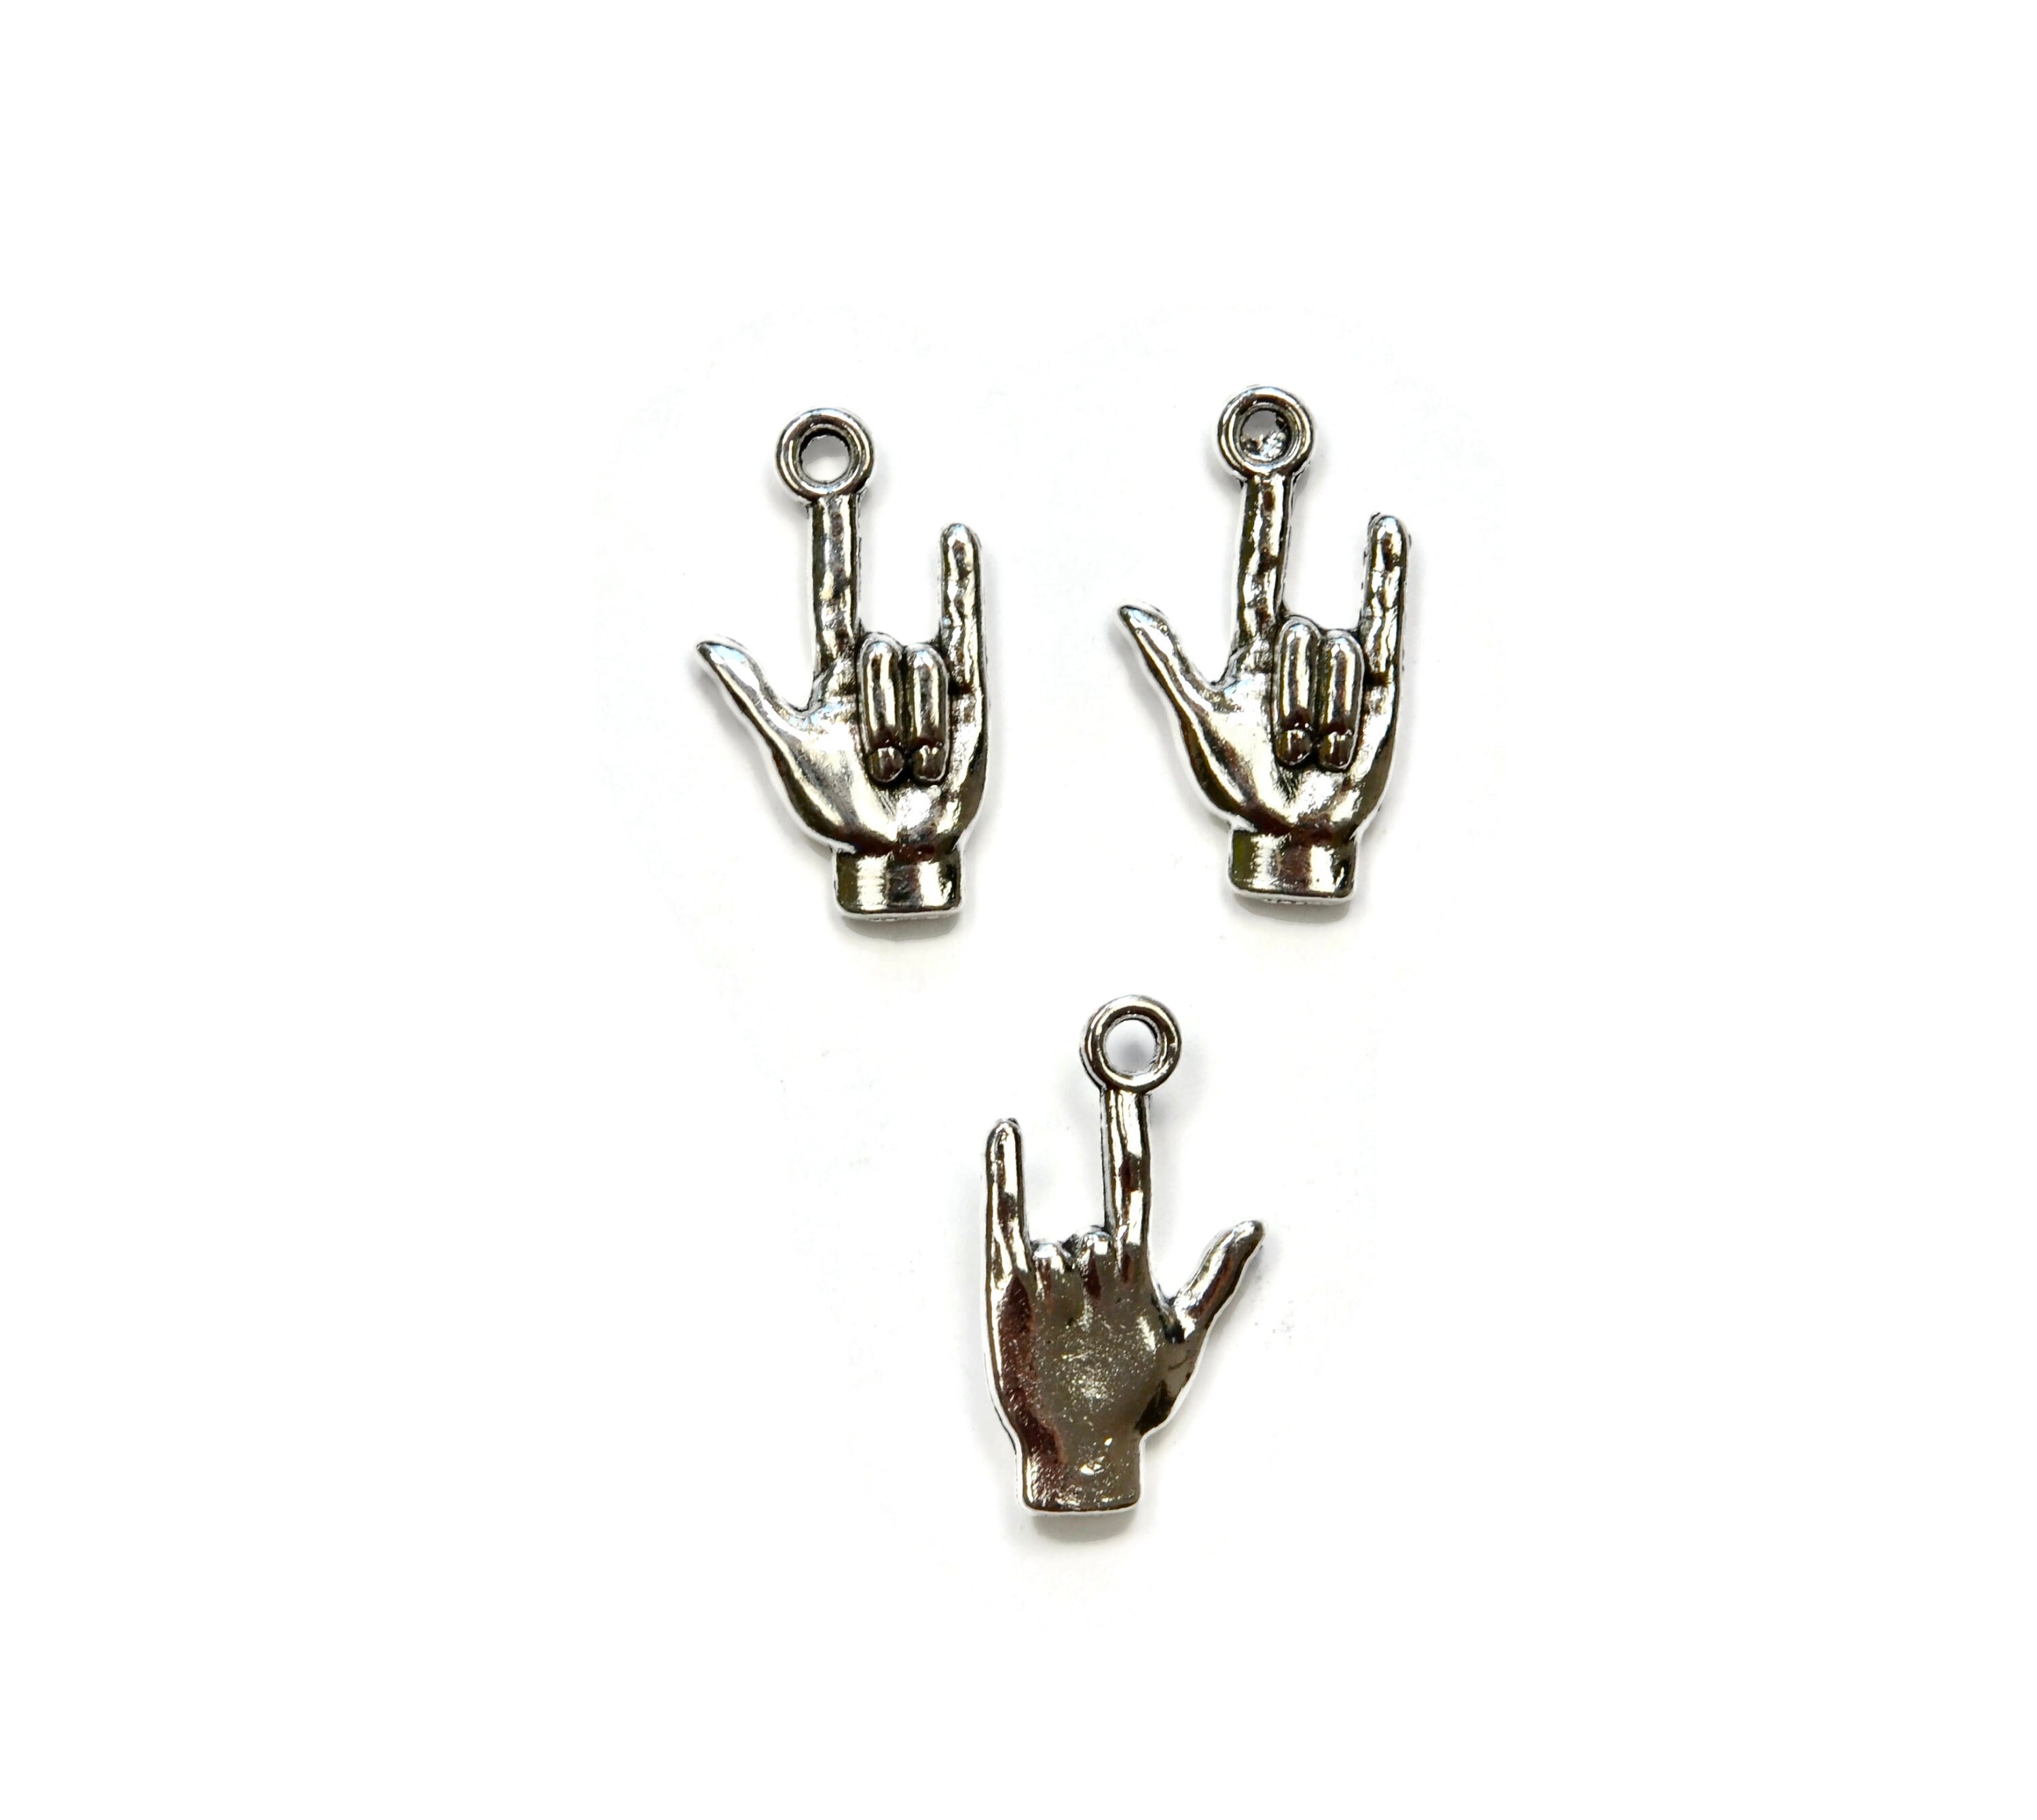 1 I Love You Hand Gesture Silver Tone Charm SC2271 - Etsy